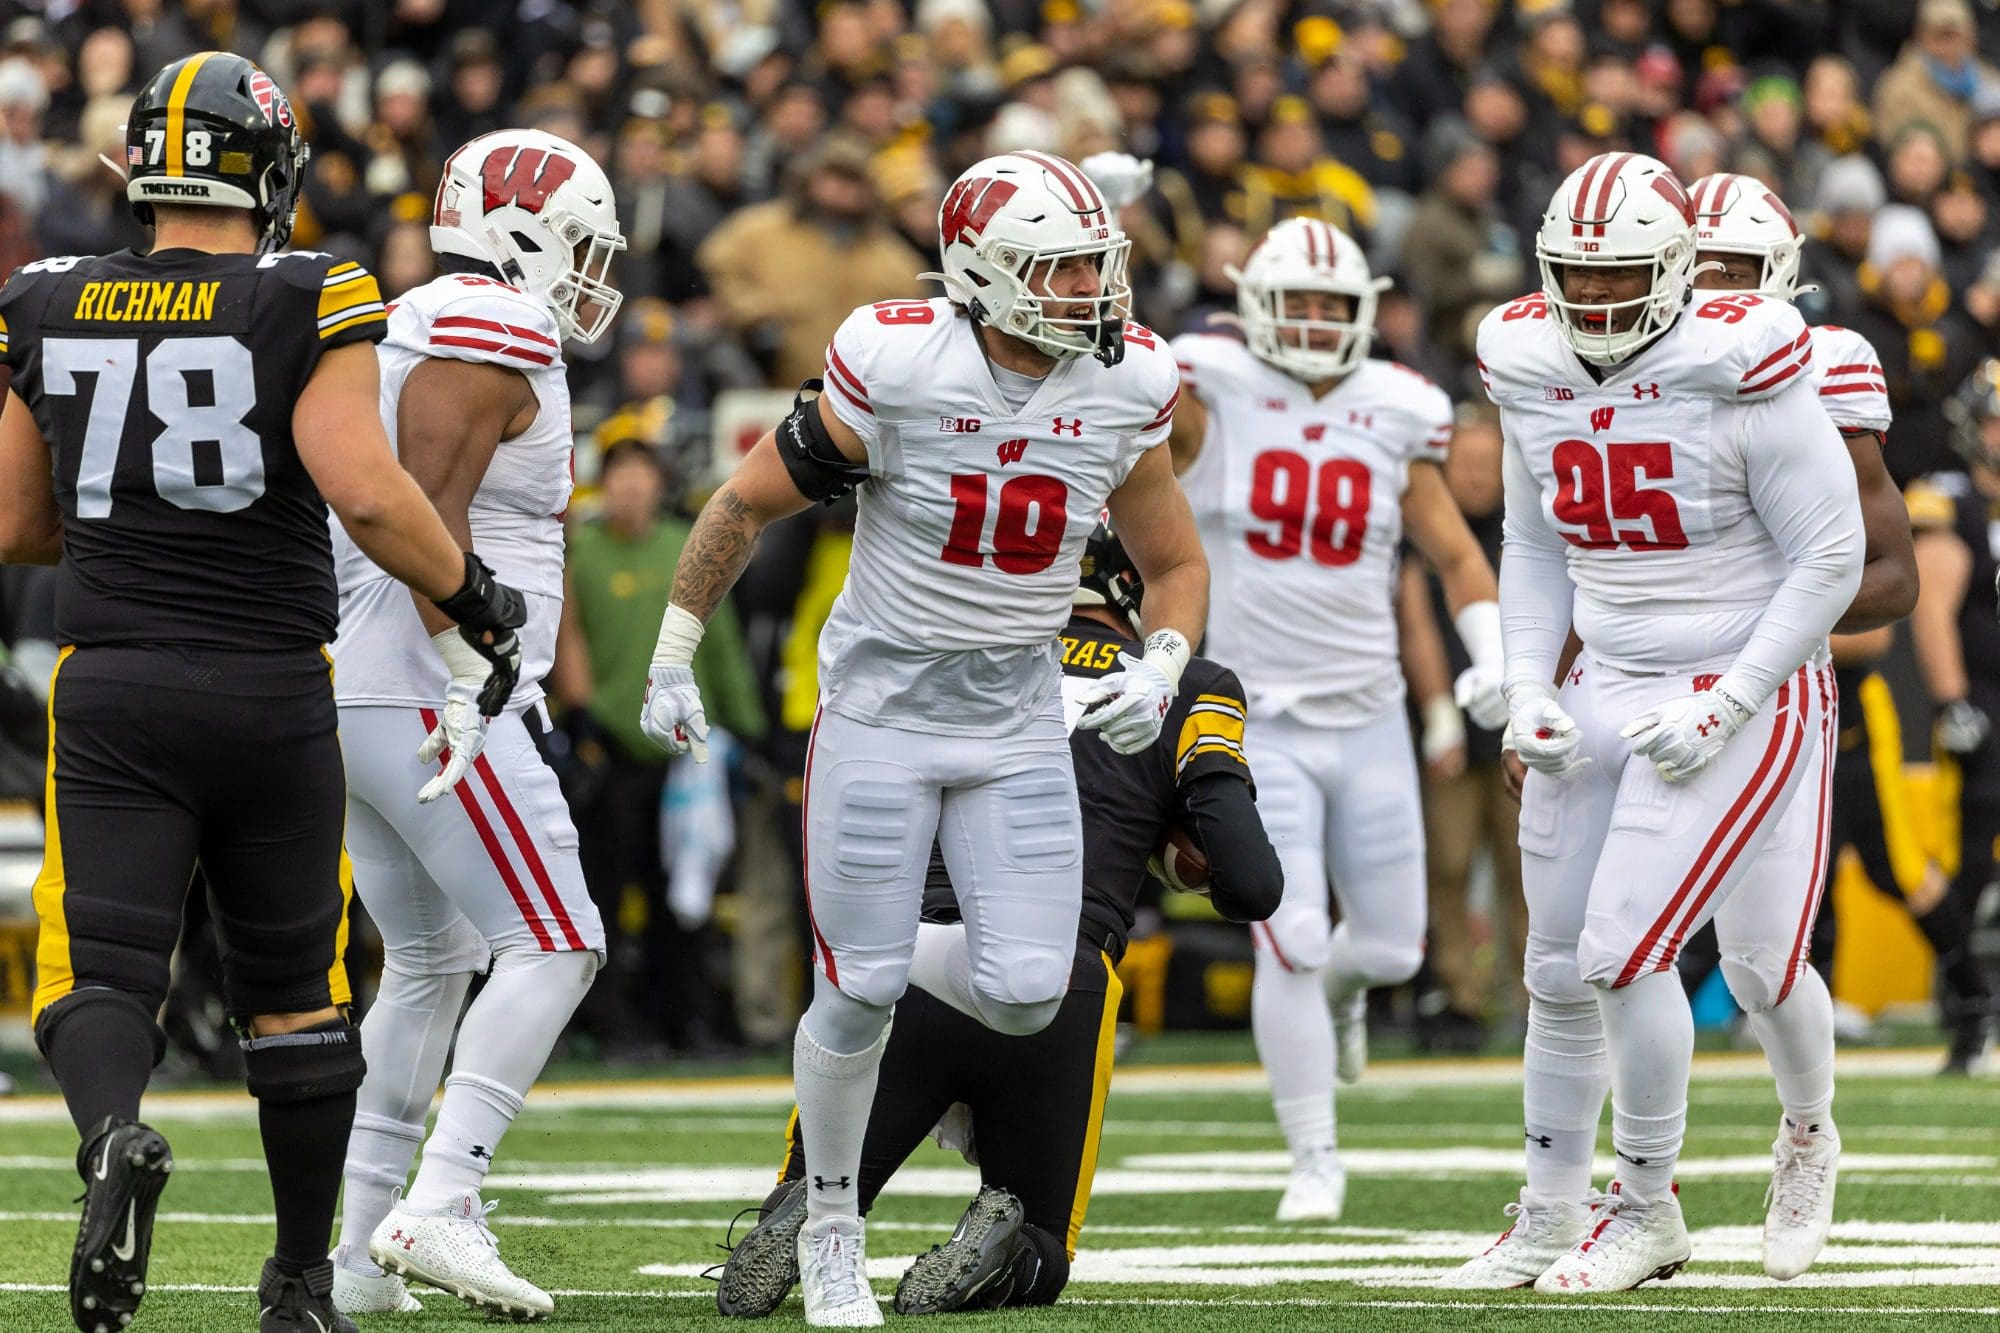 Wisconsin Football: Four Badgers invited to NFL Combine